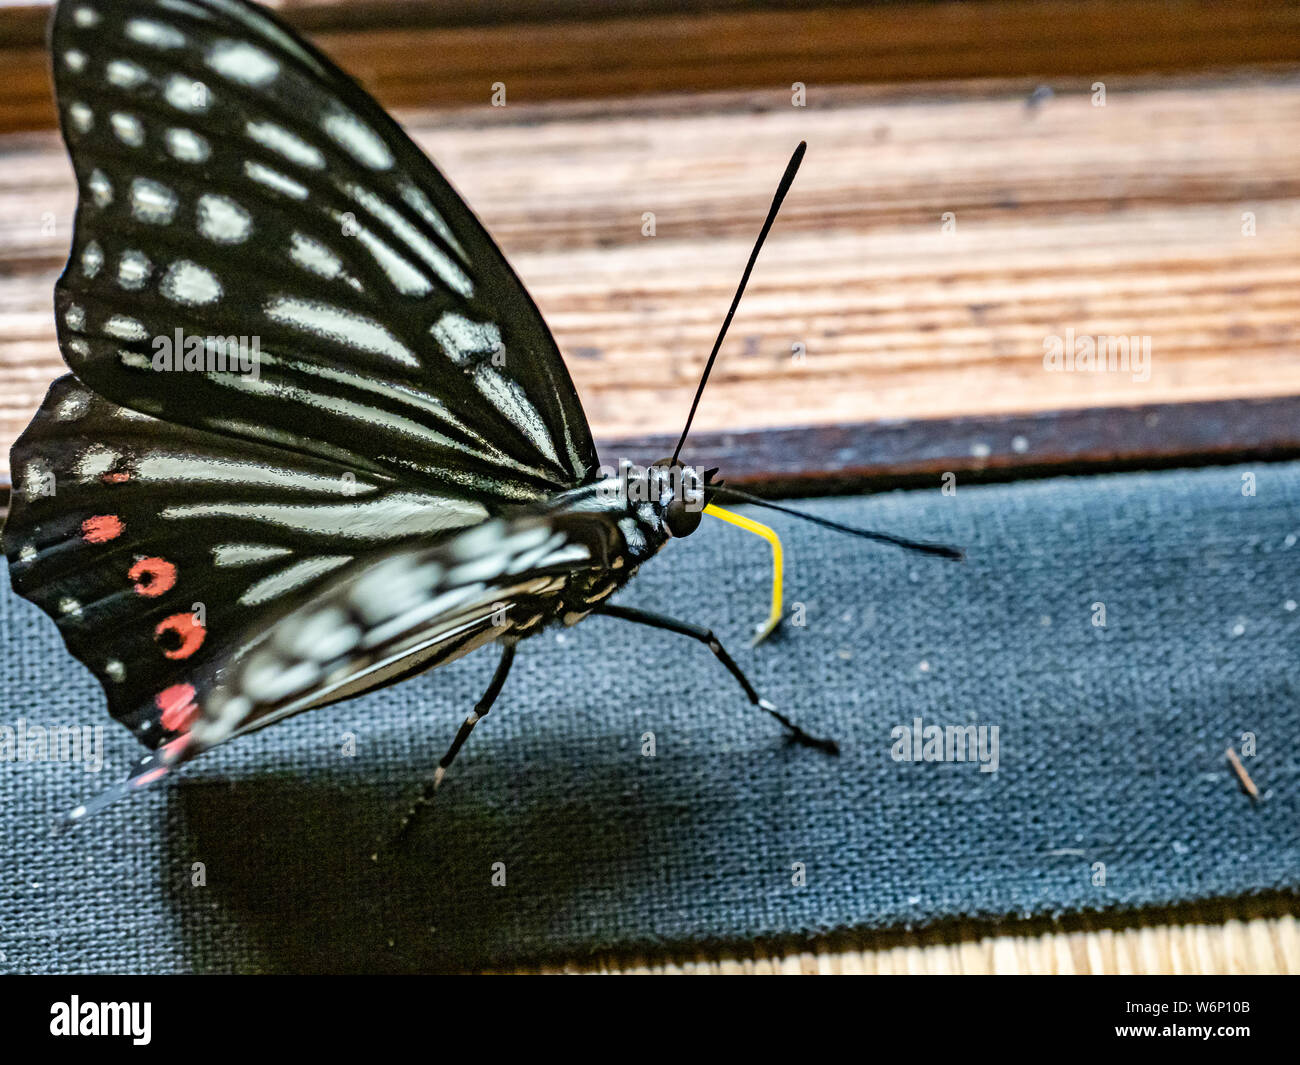 A red ring skirt butterfly, hestina assimilis, rests on the edge of a tatami mat just inside an old Japanese farm house on a hot summer day. Stock Photo